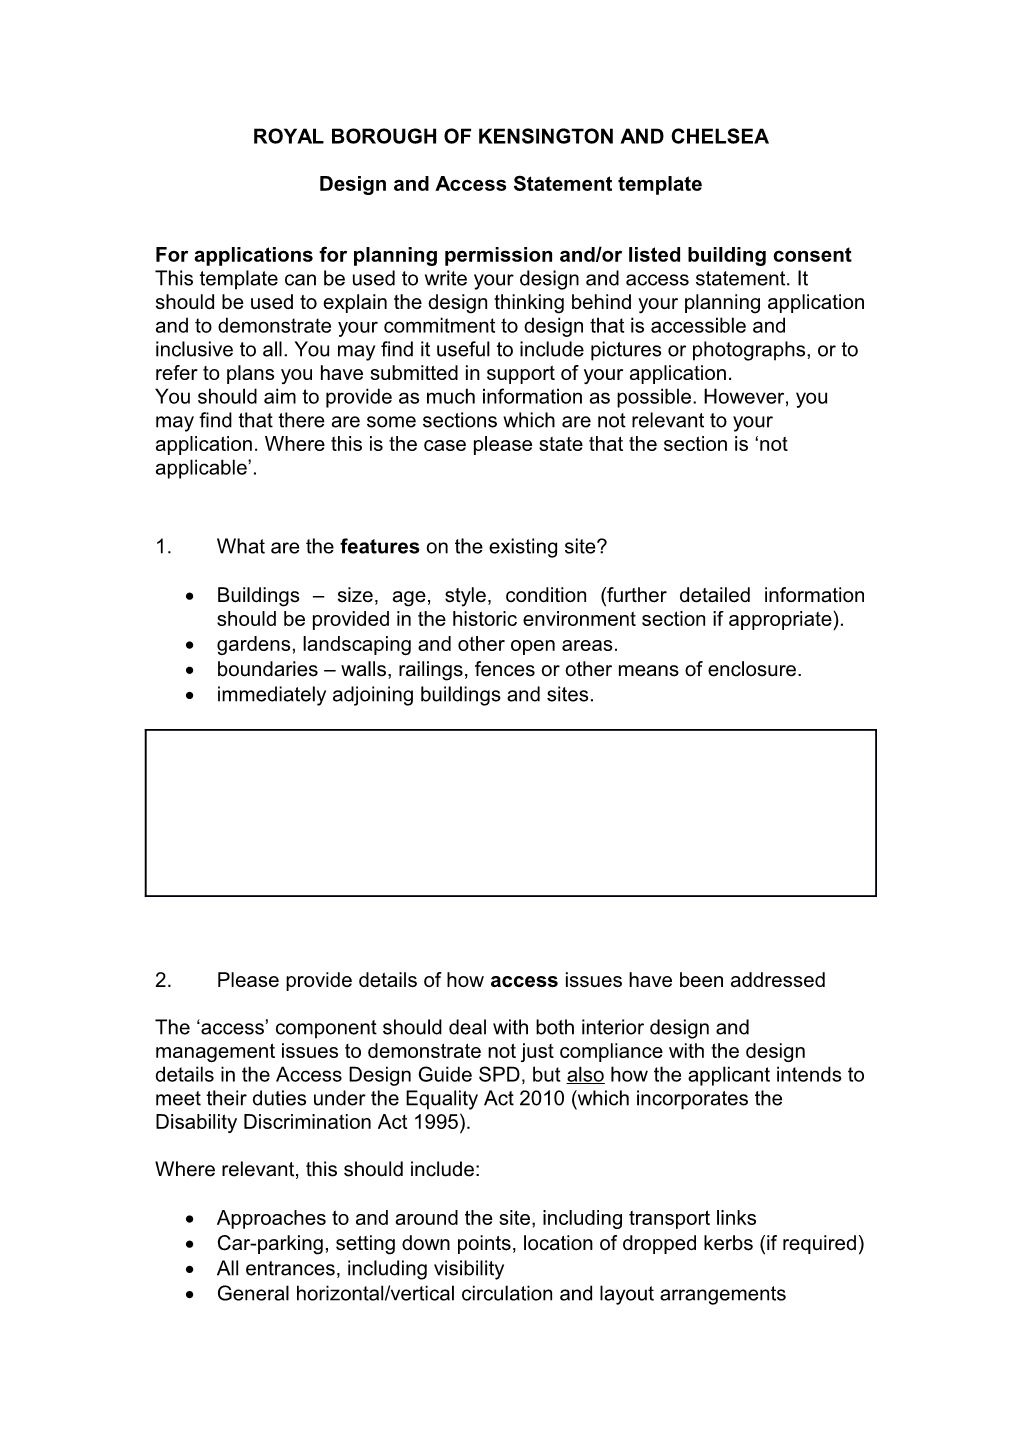 Design and Access Statement Template